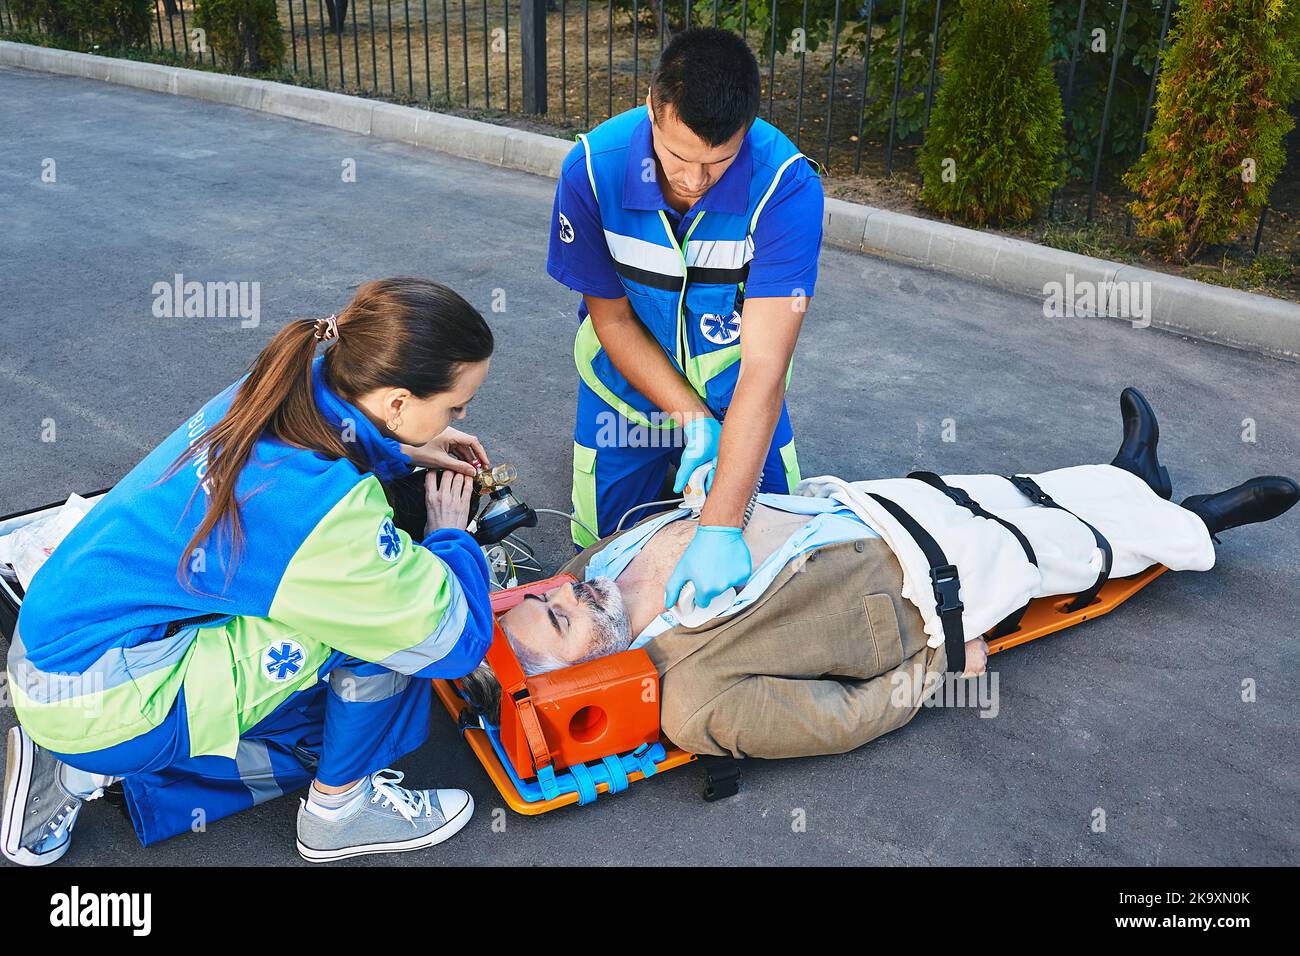 First aid, CPR by rescue workers. Two paramedics performing CPR with mobile defibrillator and manual resuscitator for injury man Stock Photo